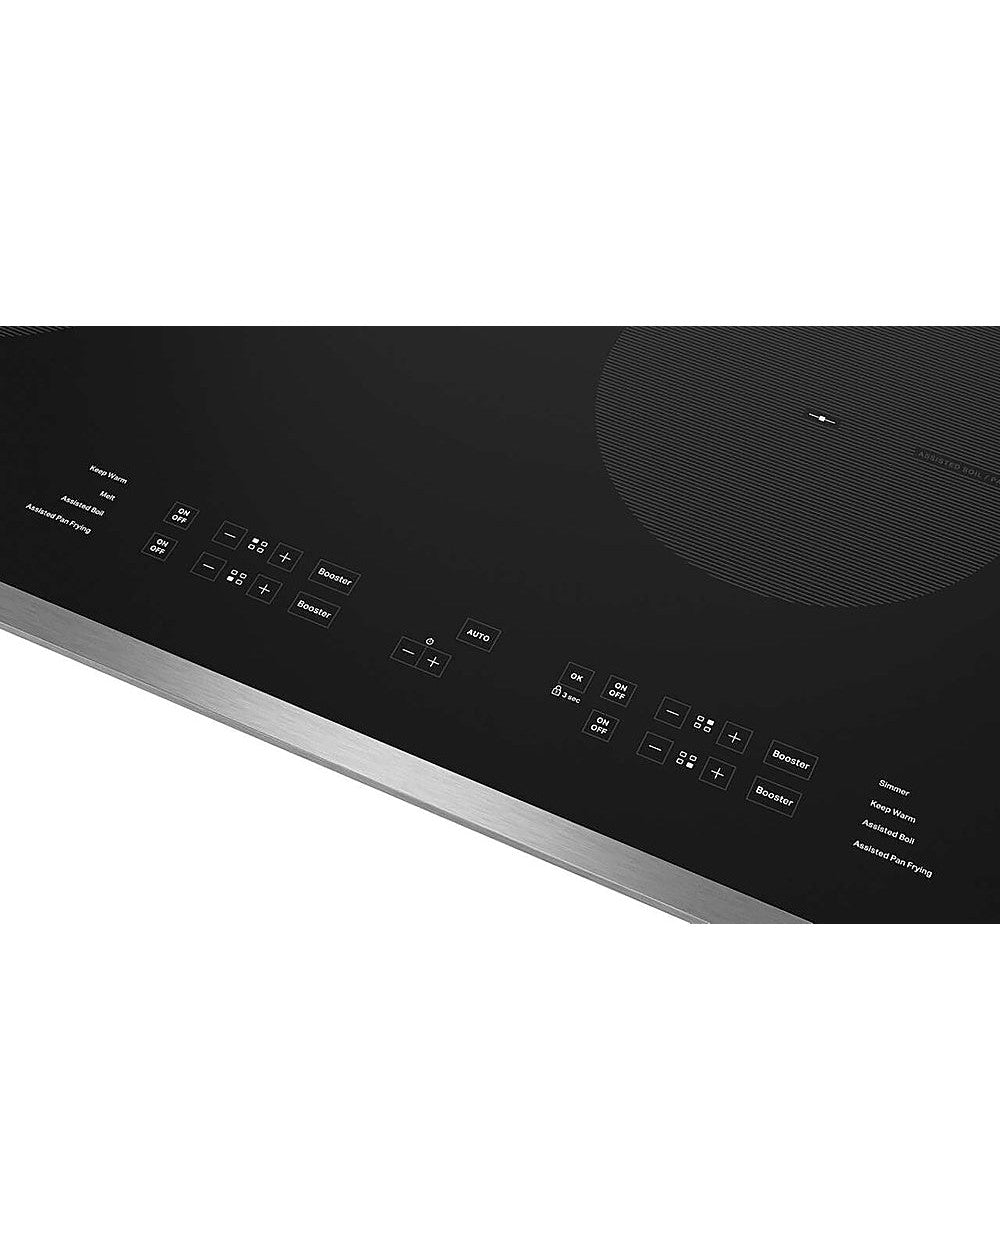 WHIRLPOOL WCI55US0JS 30-Inch Induction Cooktop